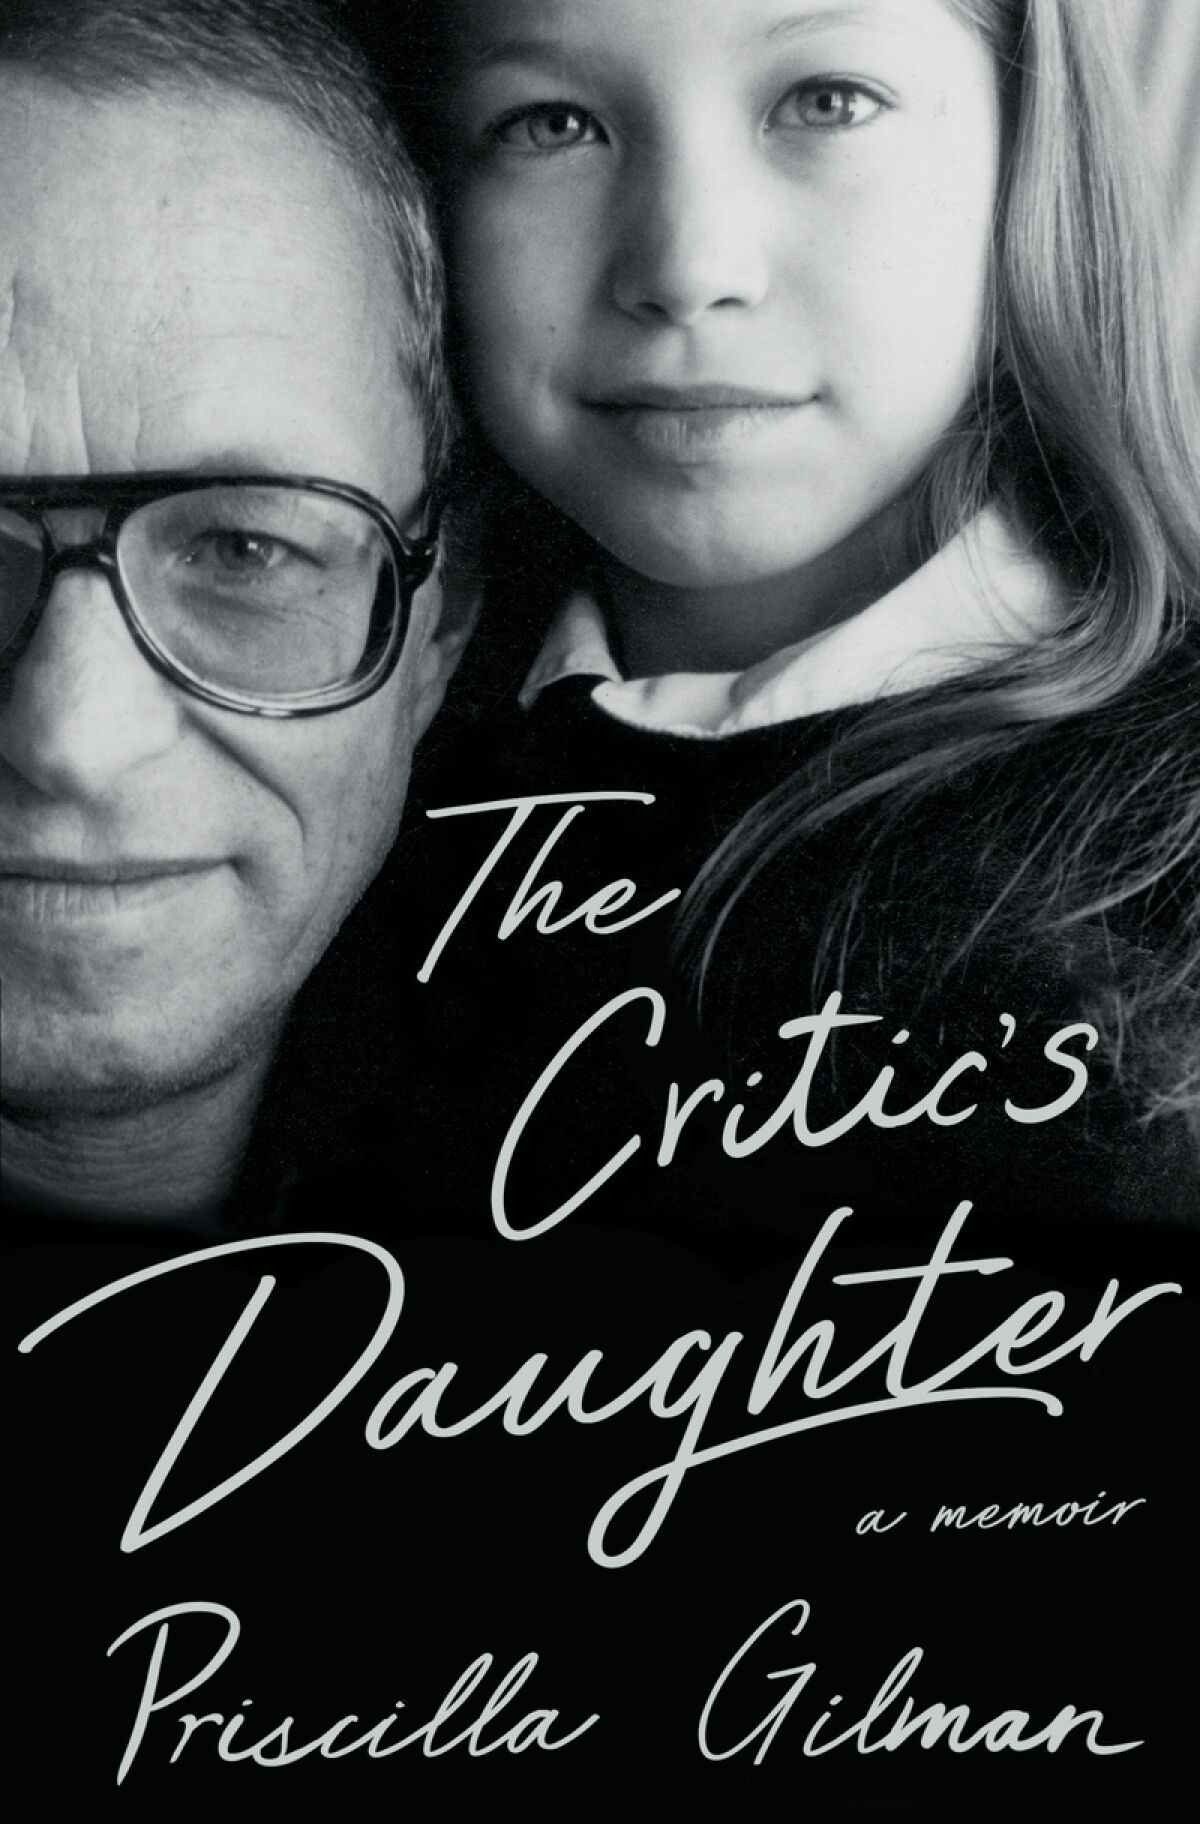 Book cover of "The Critic's Daughter."